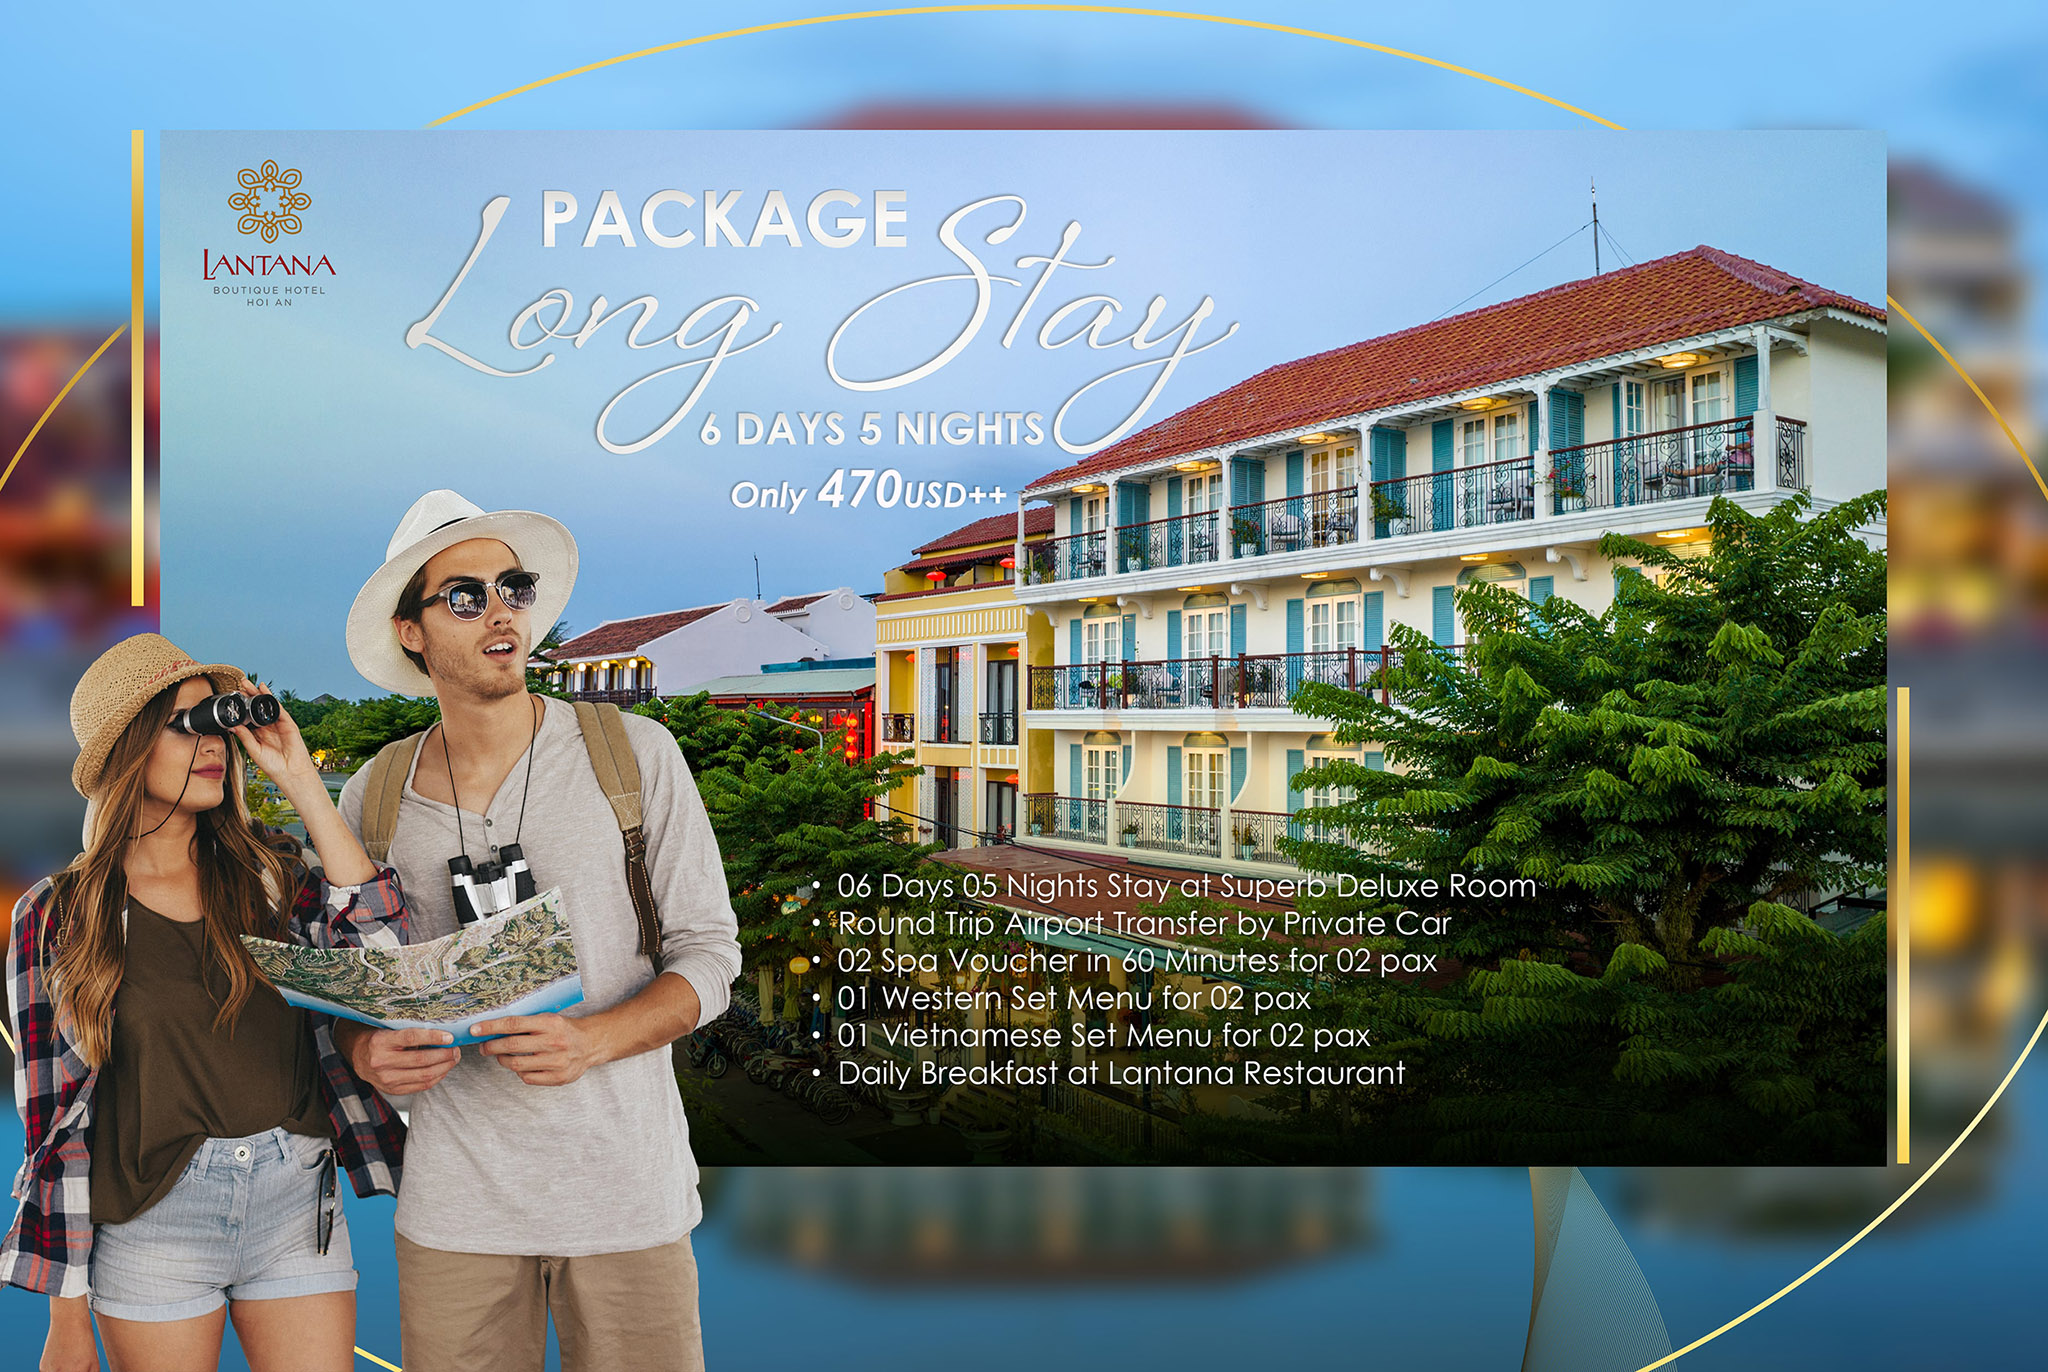 LONG STAY PACKAGE